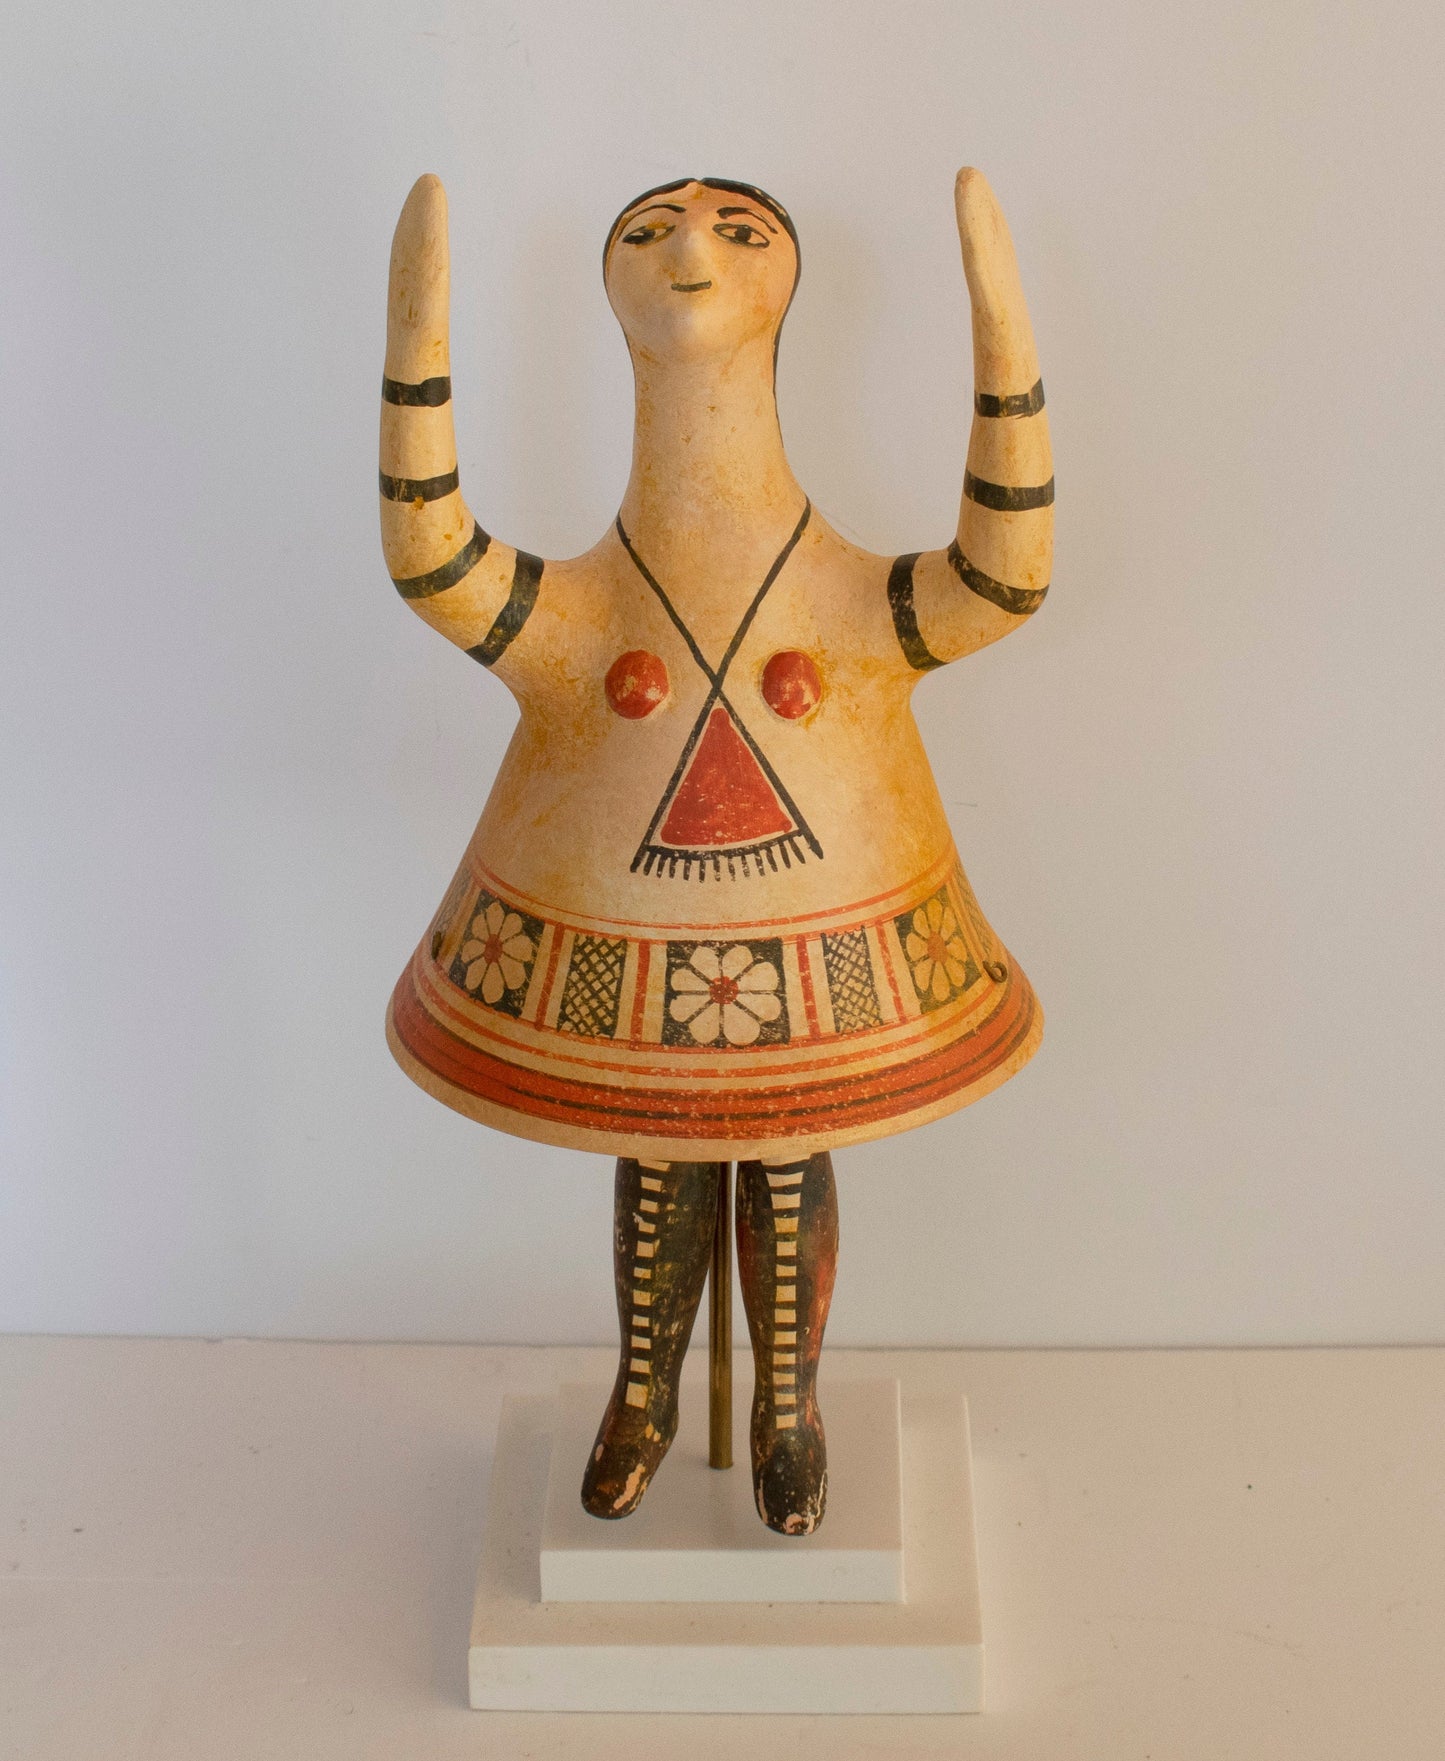 Bell-Shaped Female Figurine - 500 BC - Cyprus - Archaeological Museum of Nicosia - Reproduction - Ceramic Artifact